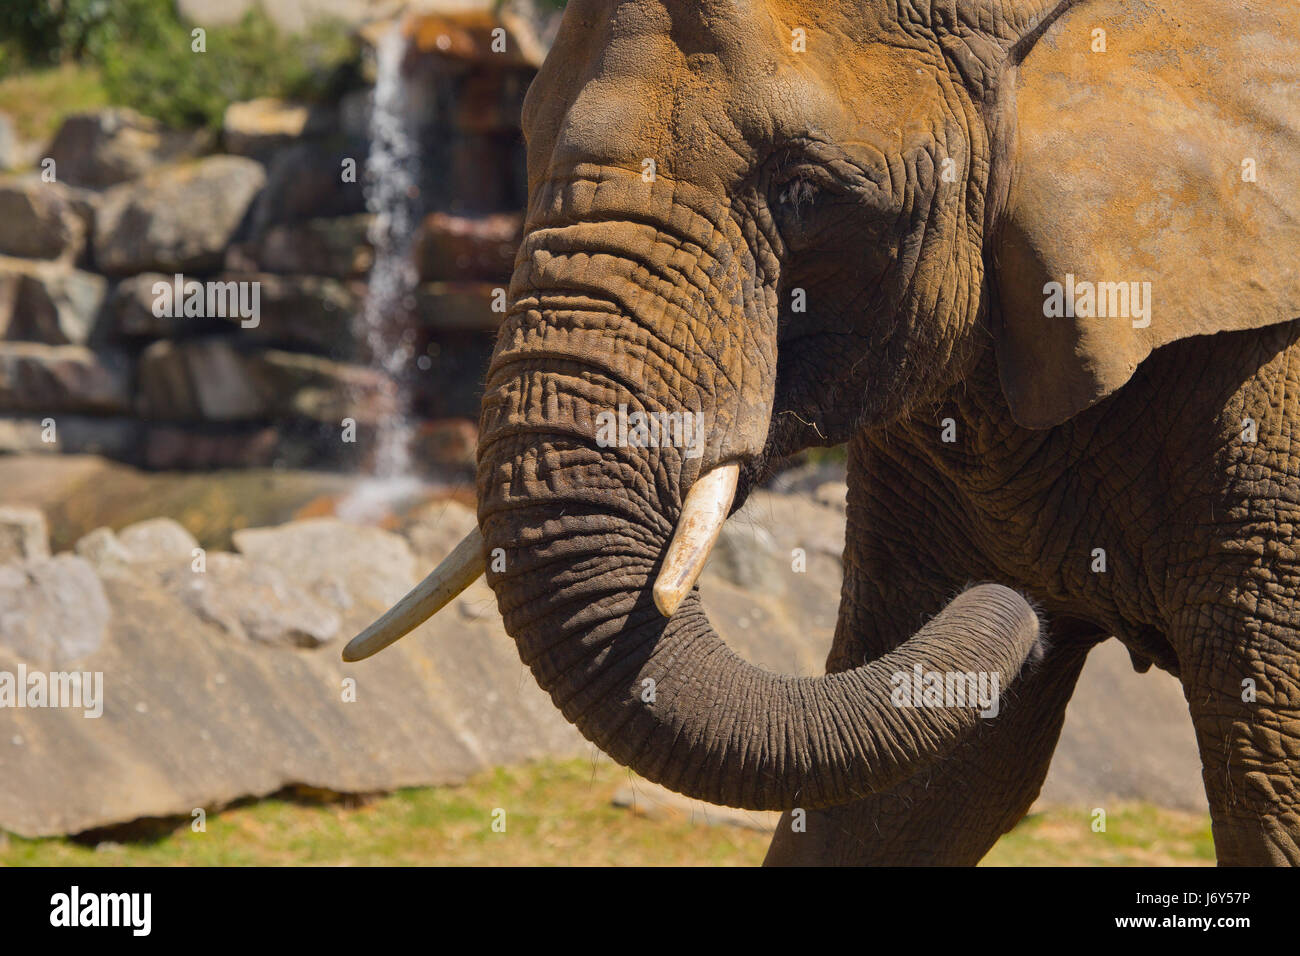 A close up image of an african elephant with rocks and waterfall in the background Stock Photo